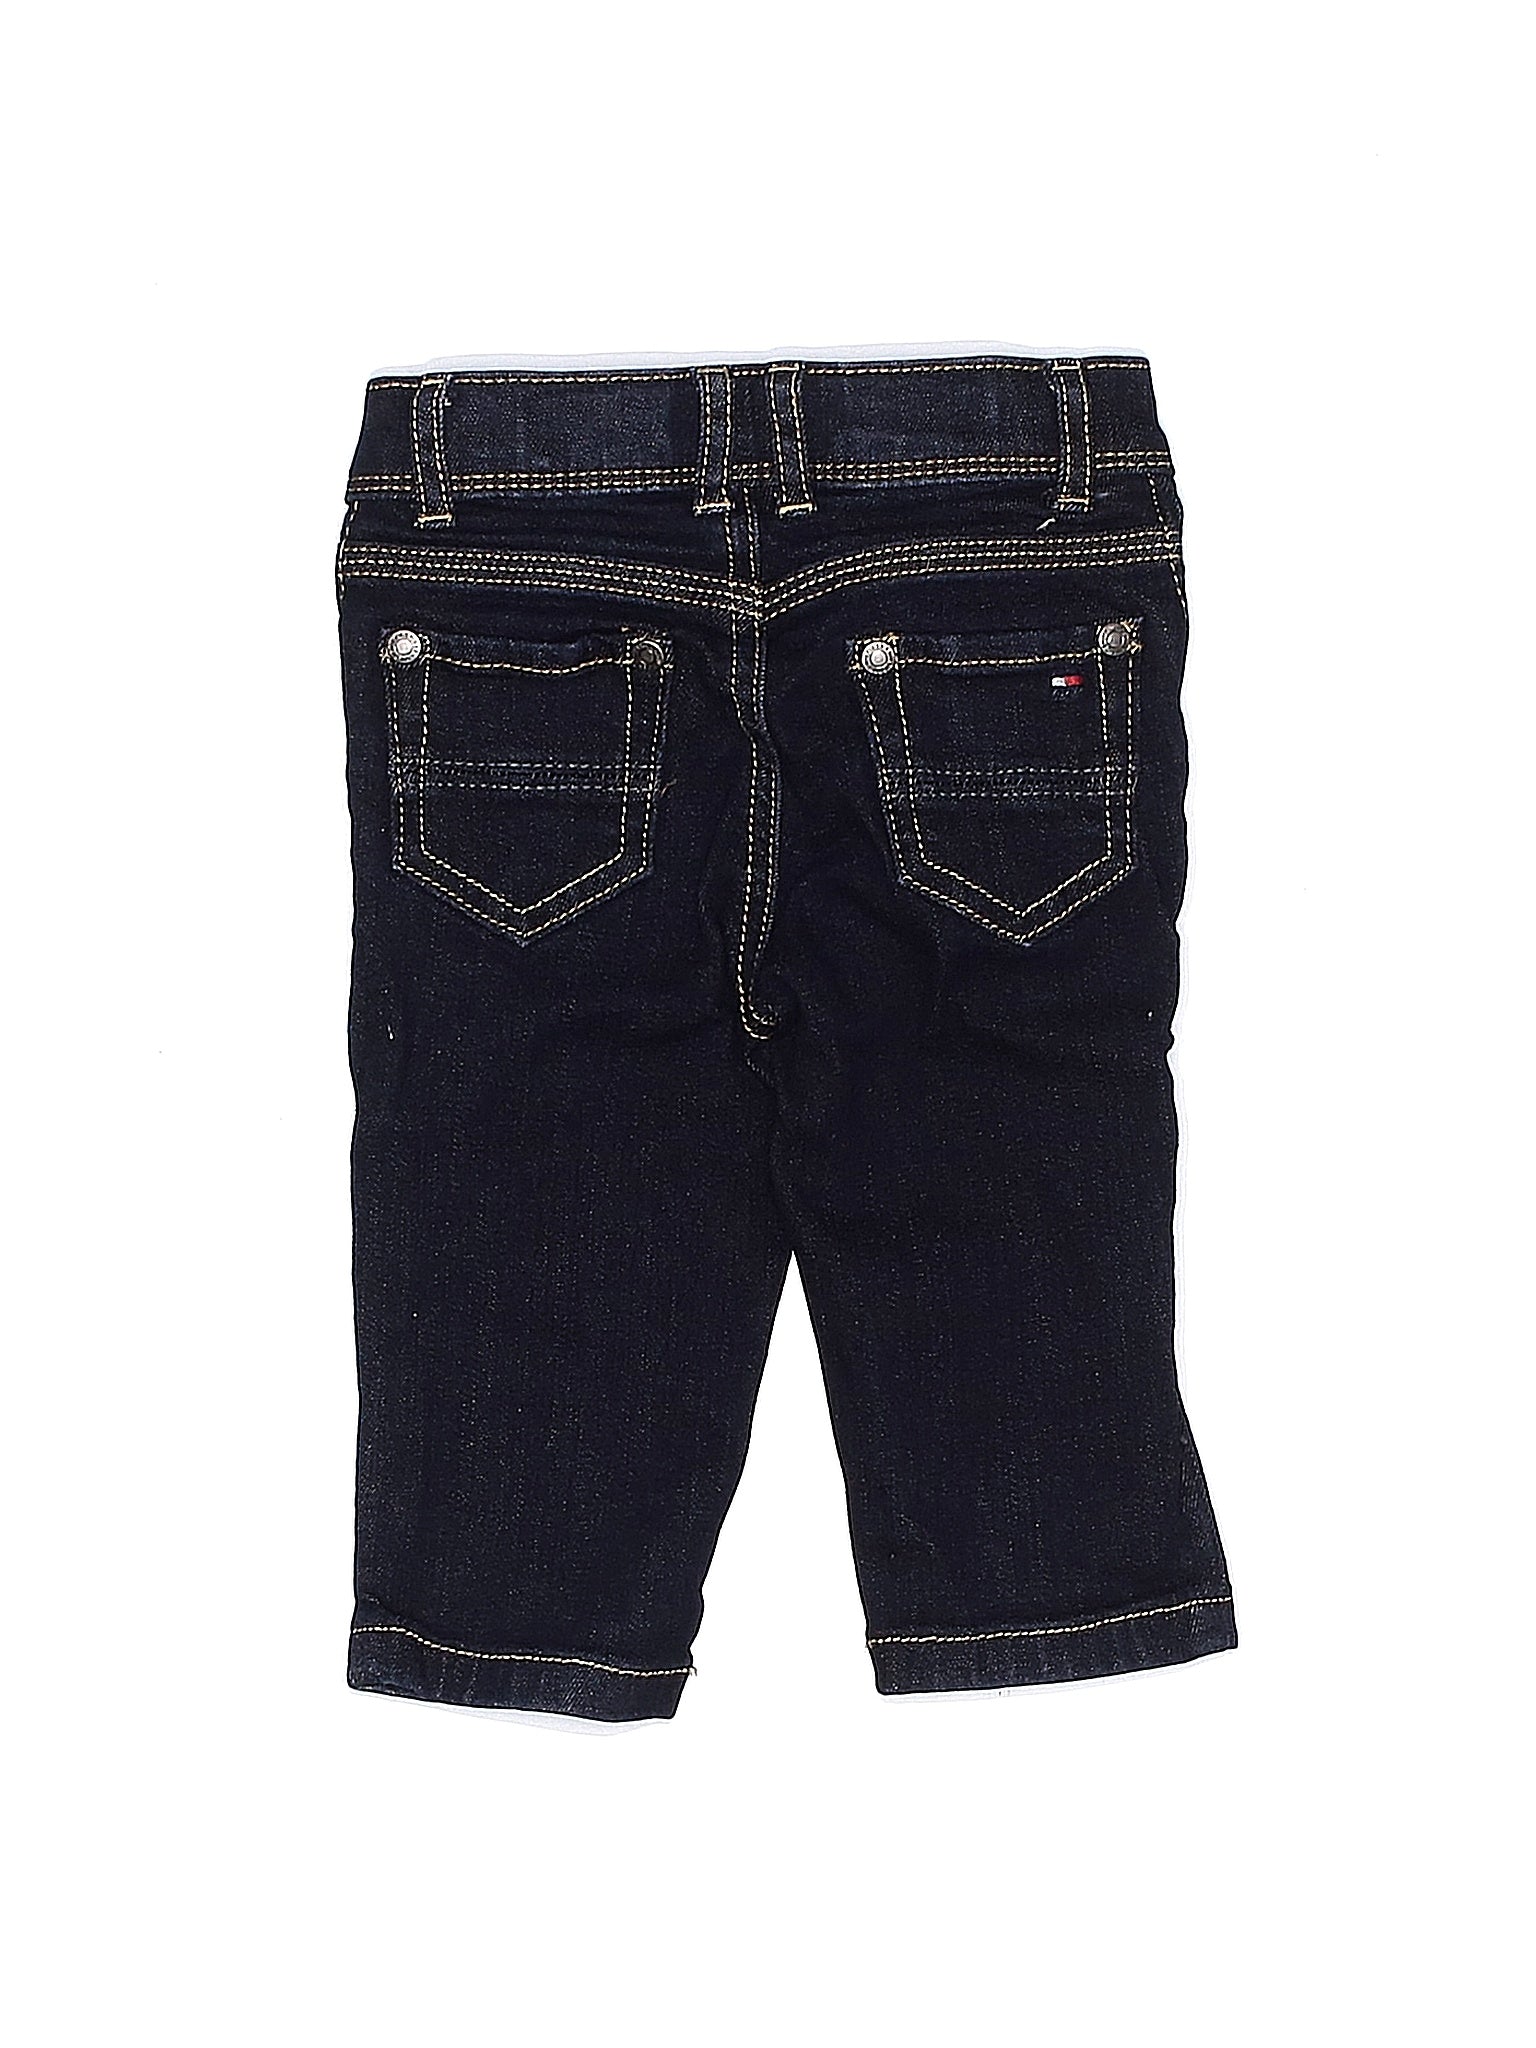 Jeans size - 6-9 mo